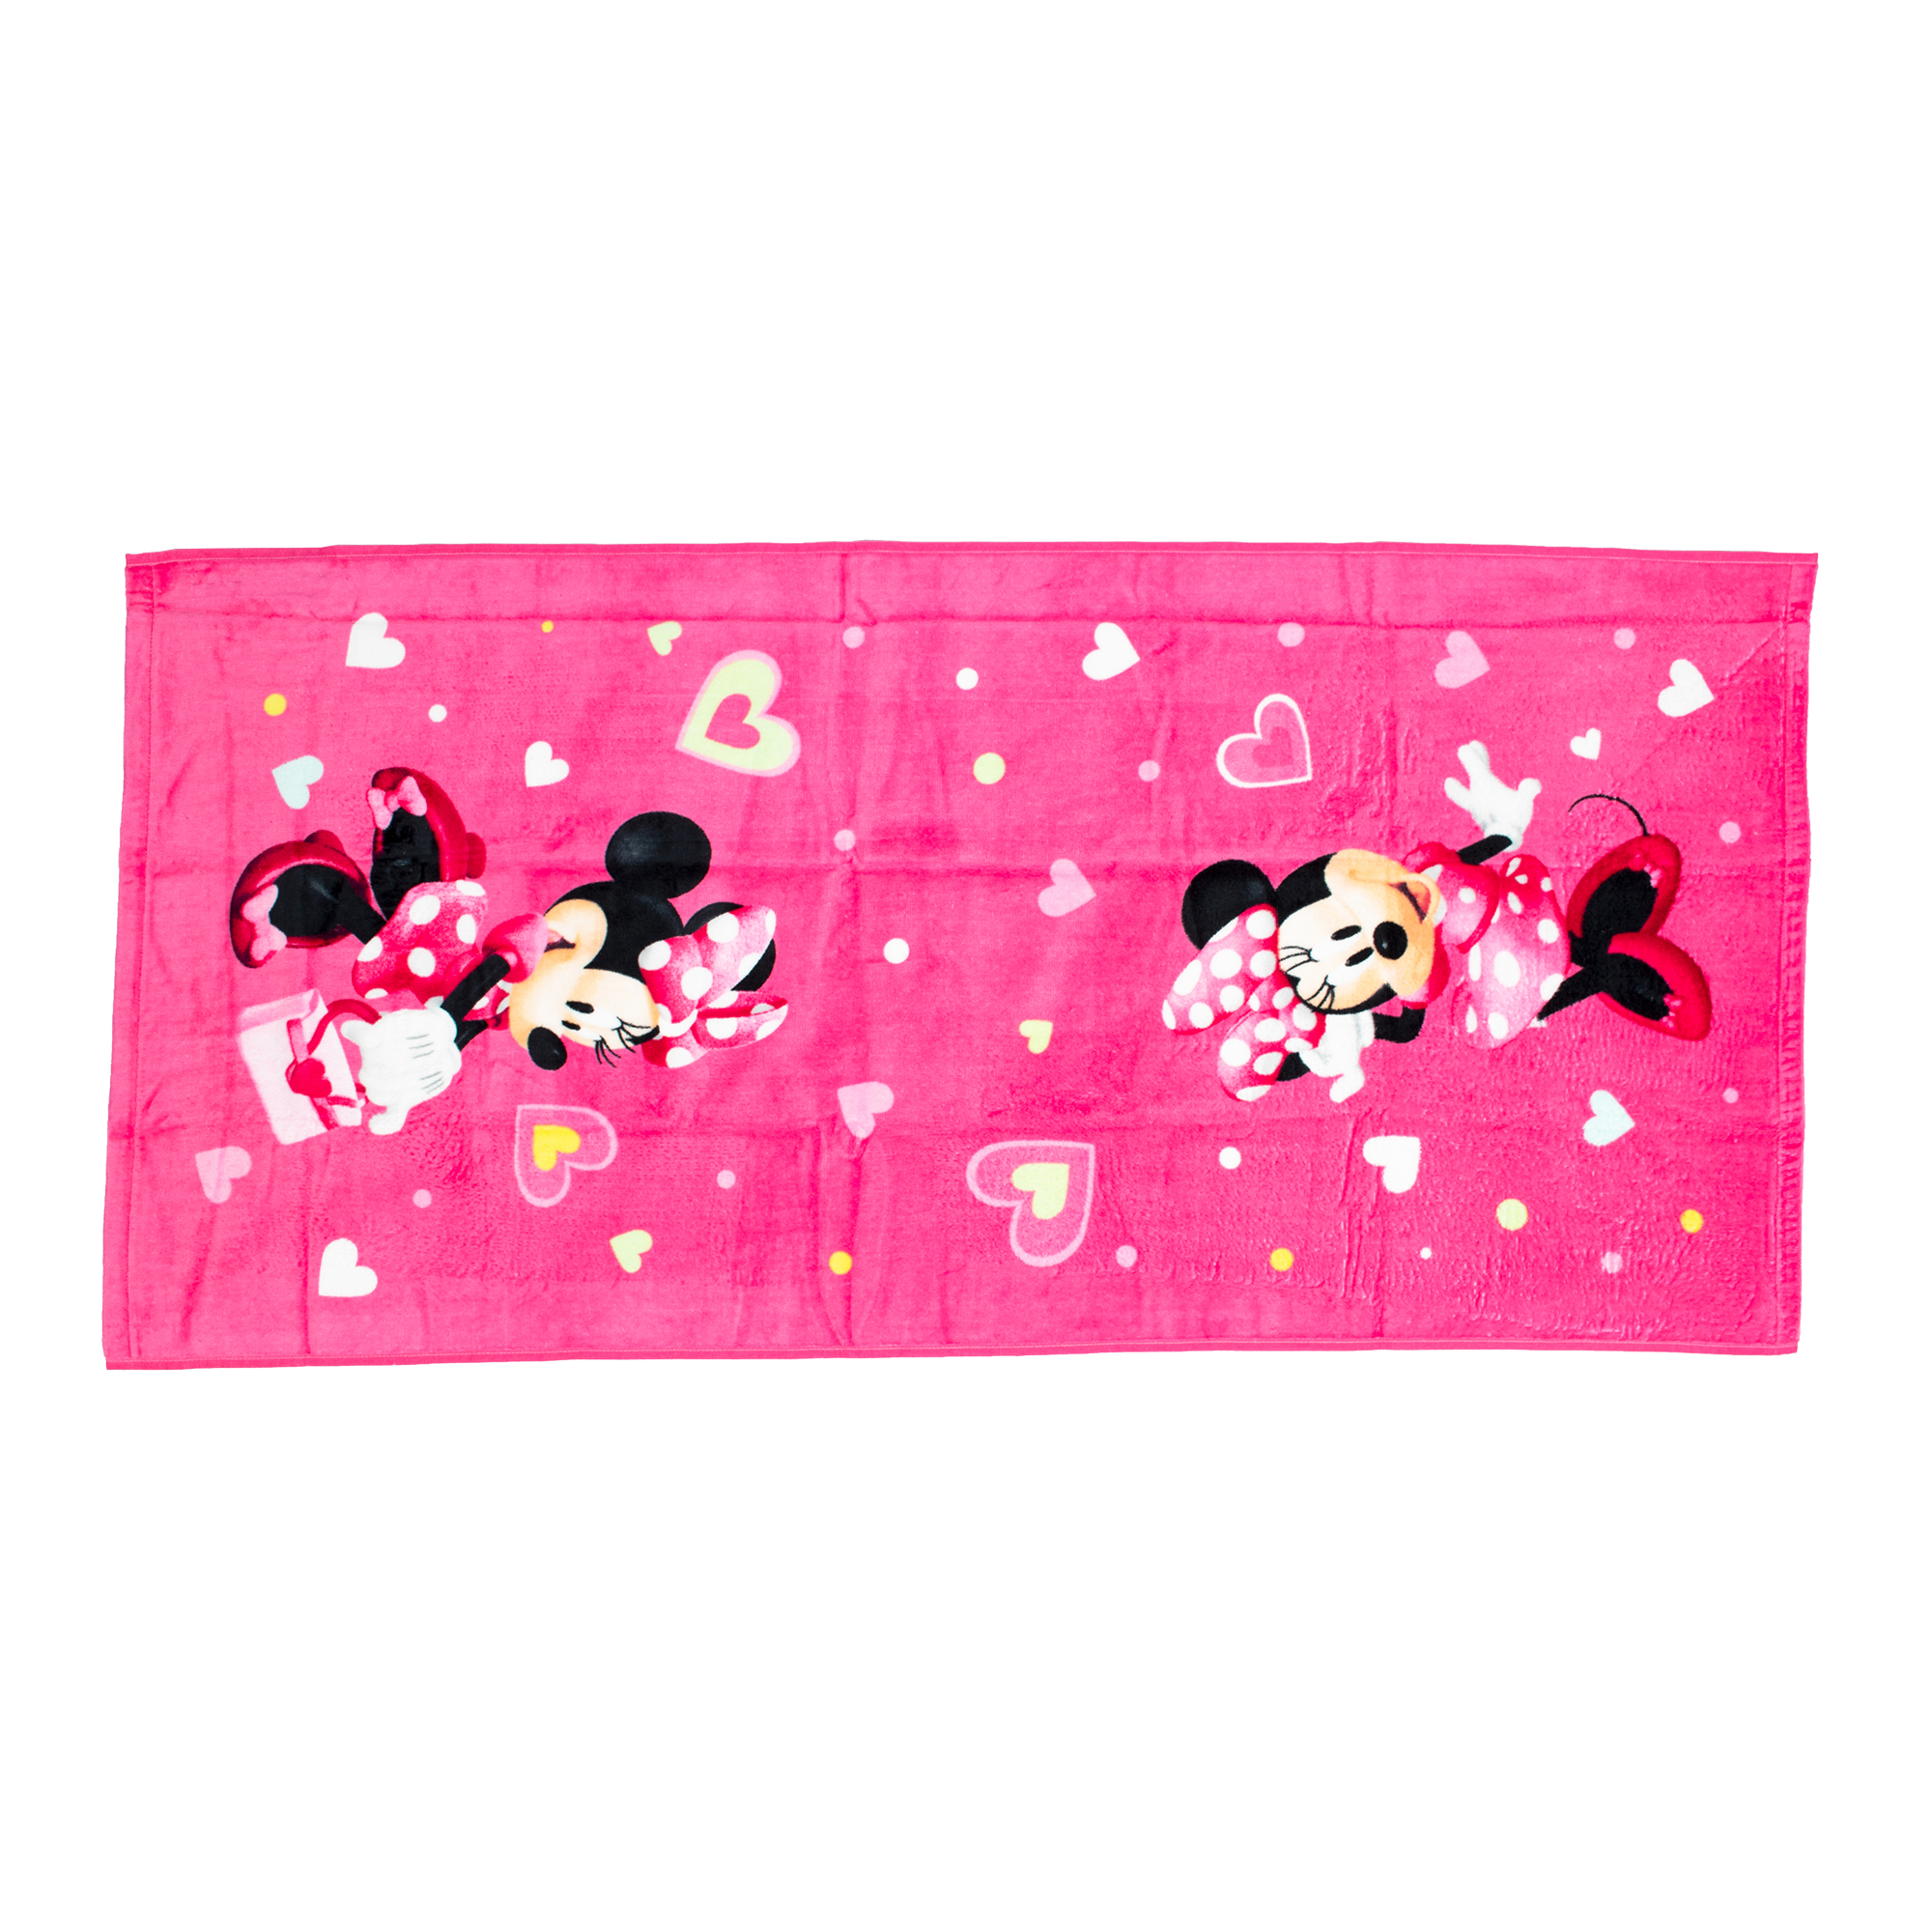 Minnie Mouse Kids Cotton 2 Piece Towel and Washcloth Set - image 4 of 8